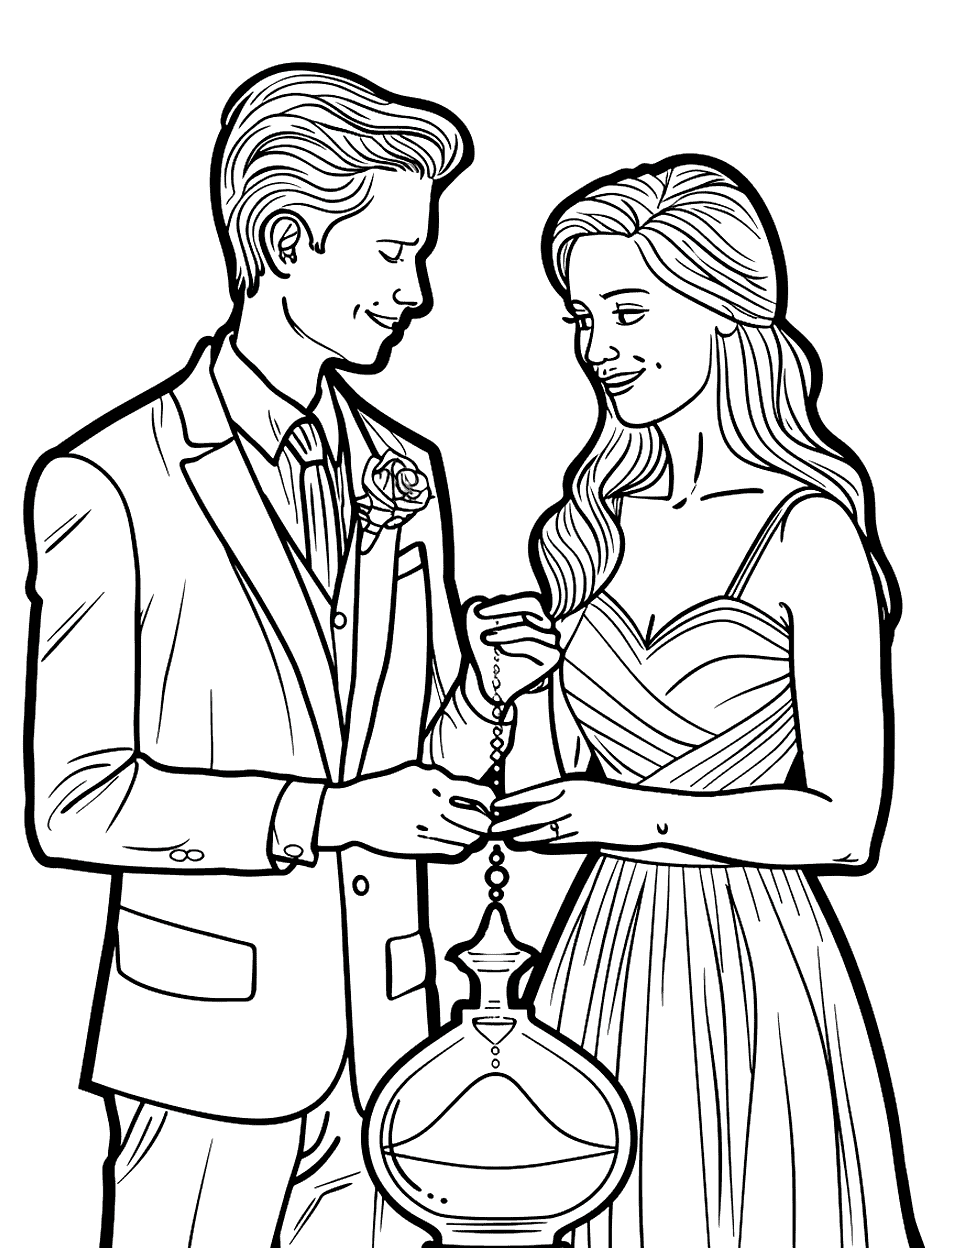 Sand Ceremony Symbolism Wedding Coloring Page - A couple pouring sands into a single vase.